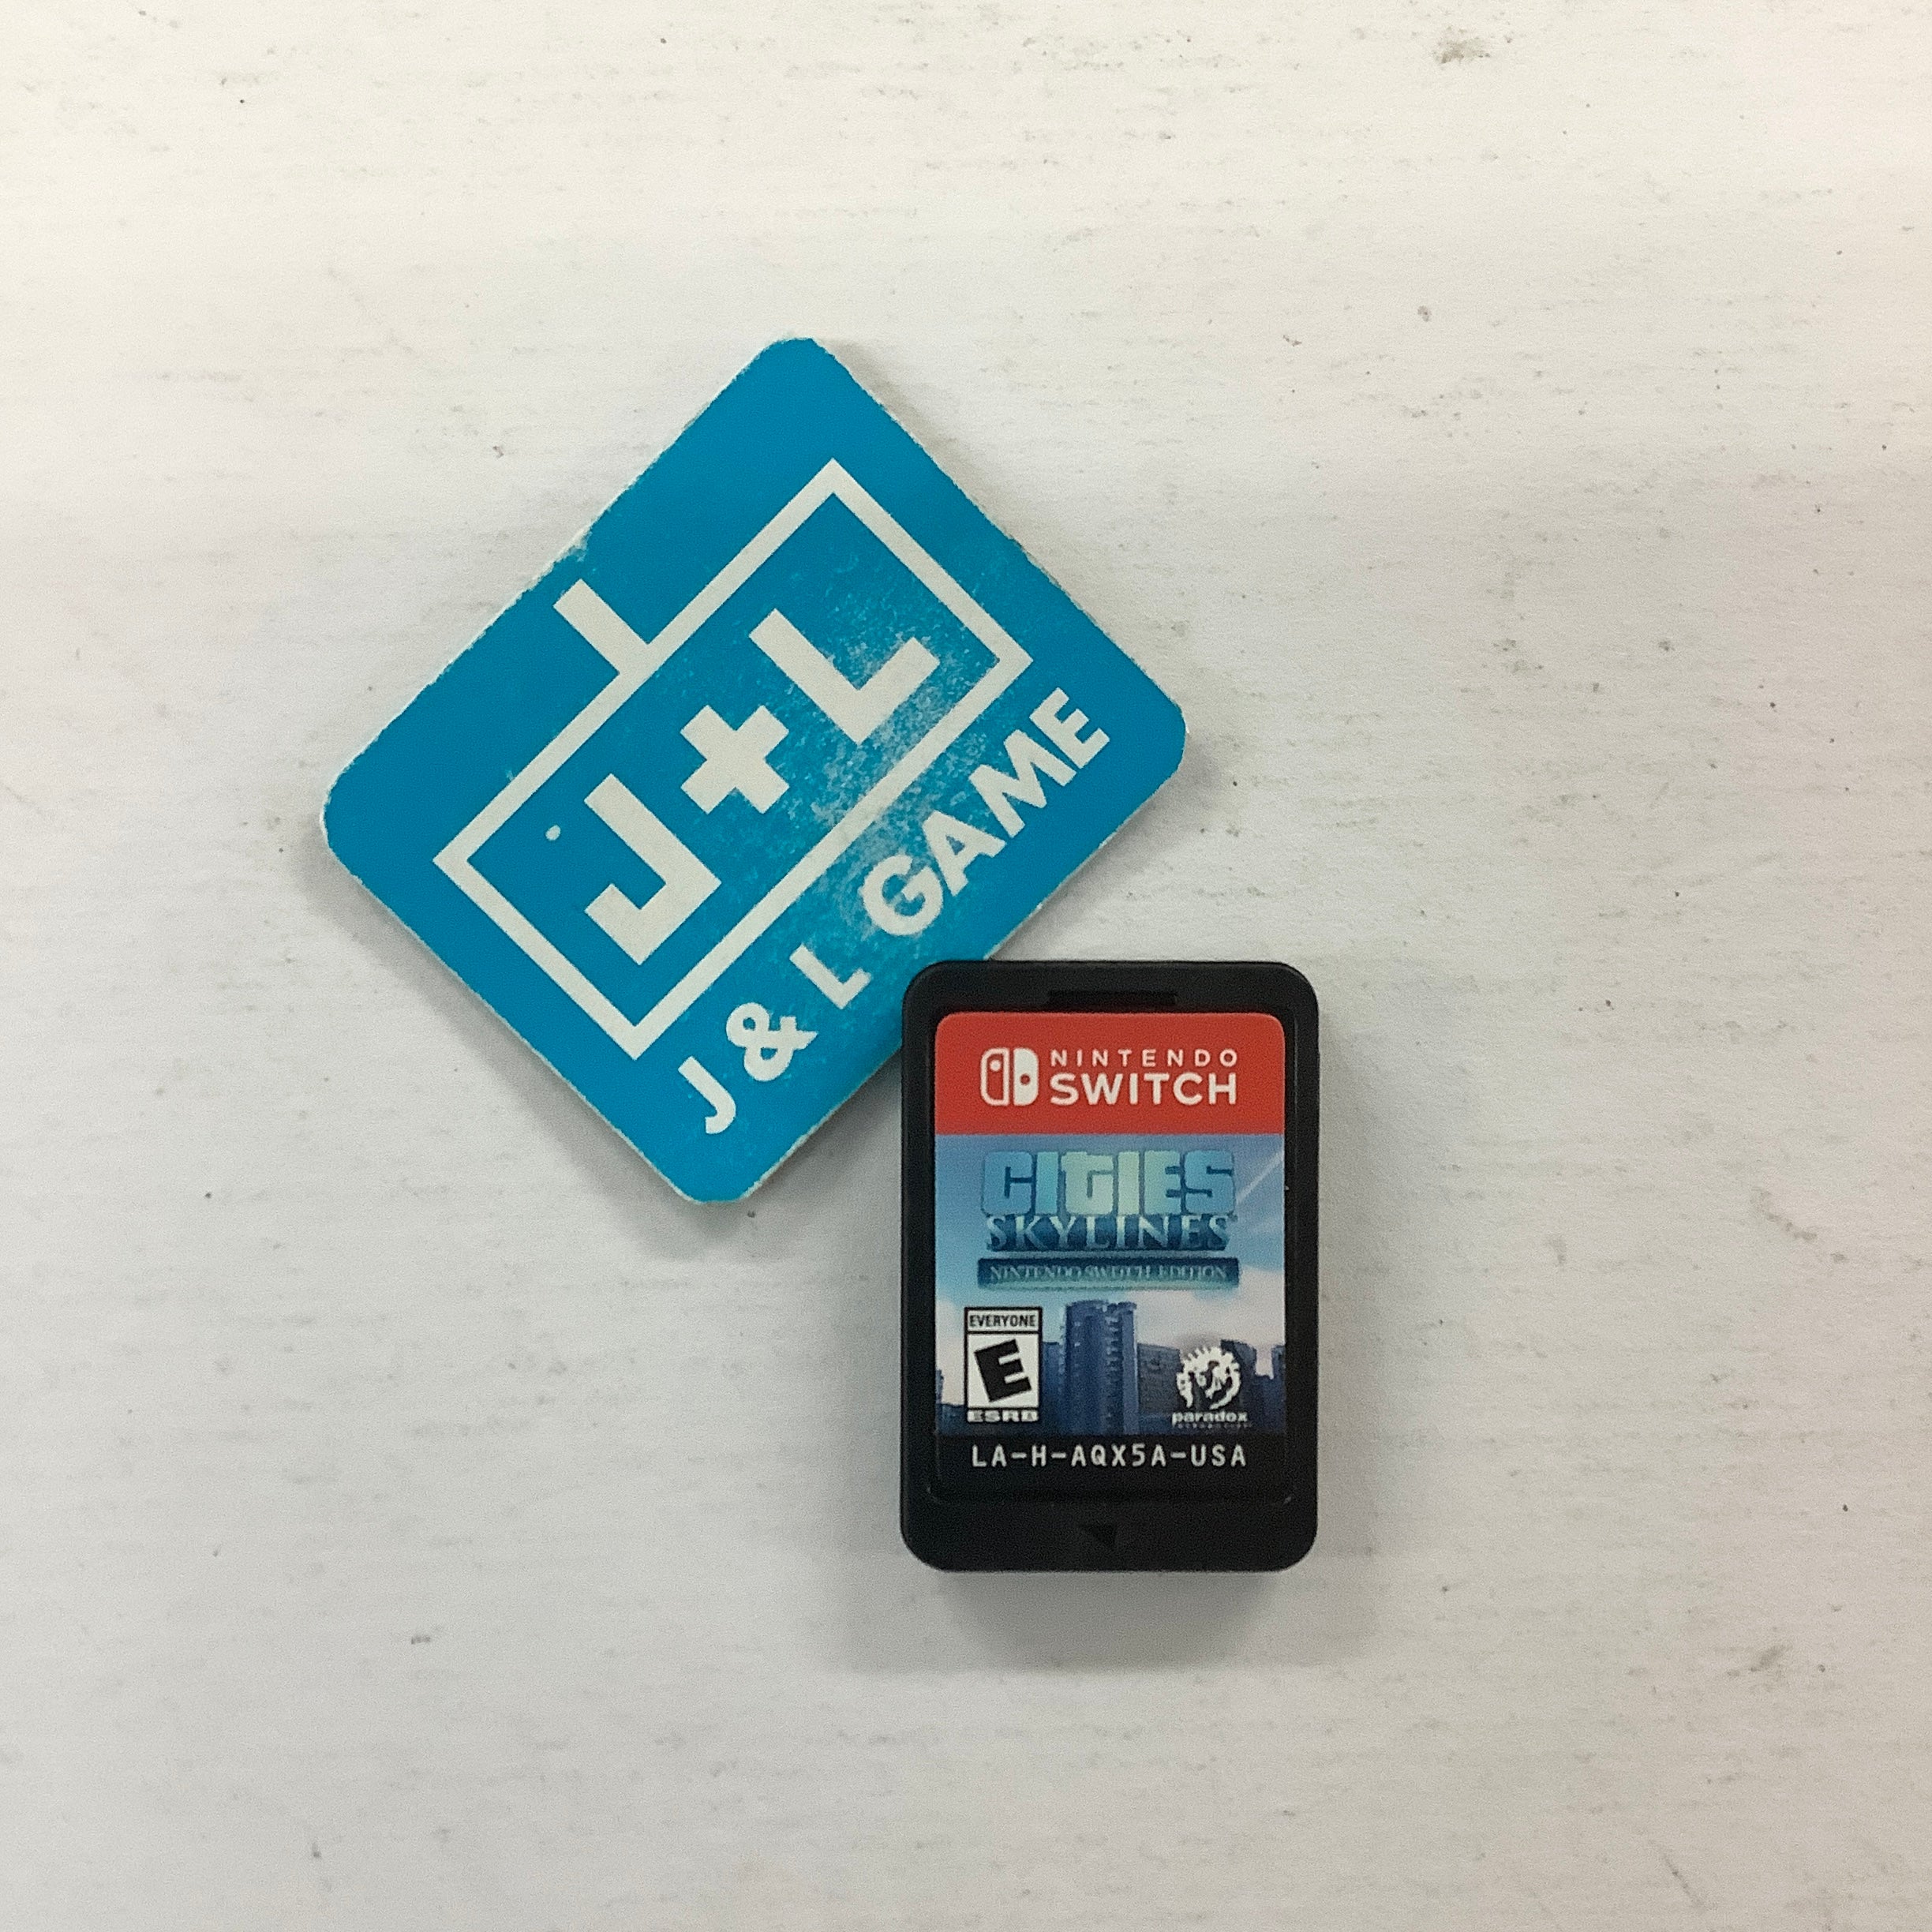 Cities: Skylines Nintendo Switch Edition - (NSW) Nintendo Switch [Pre-Owned] Video Games Paradox Interactive   